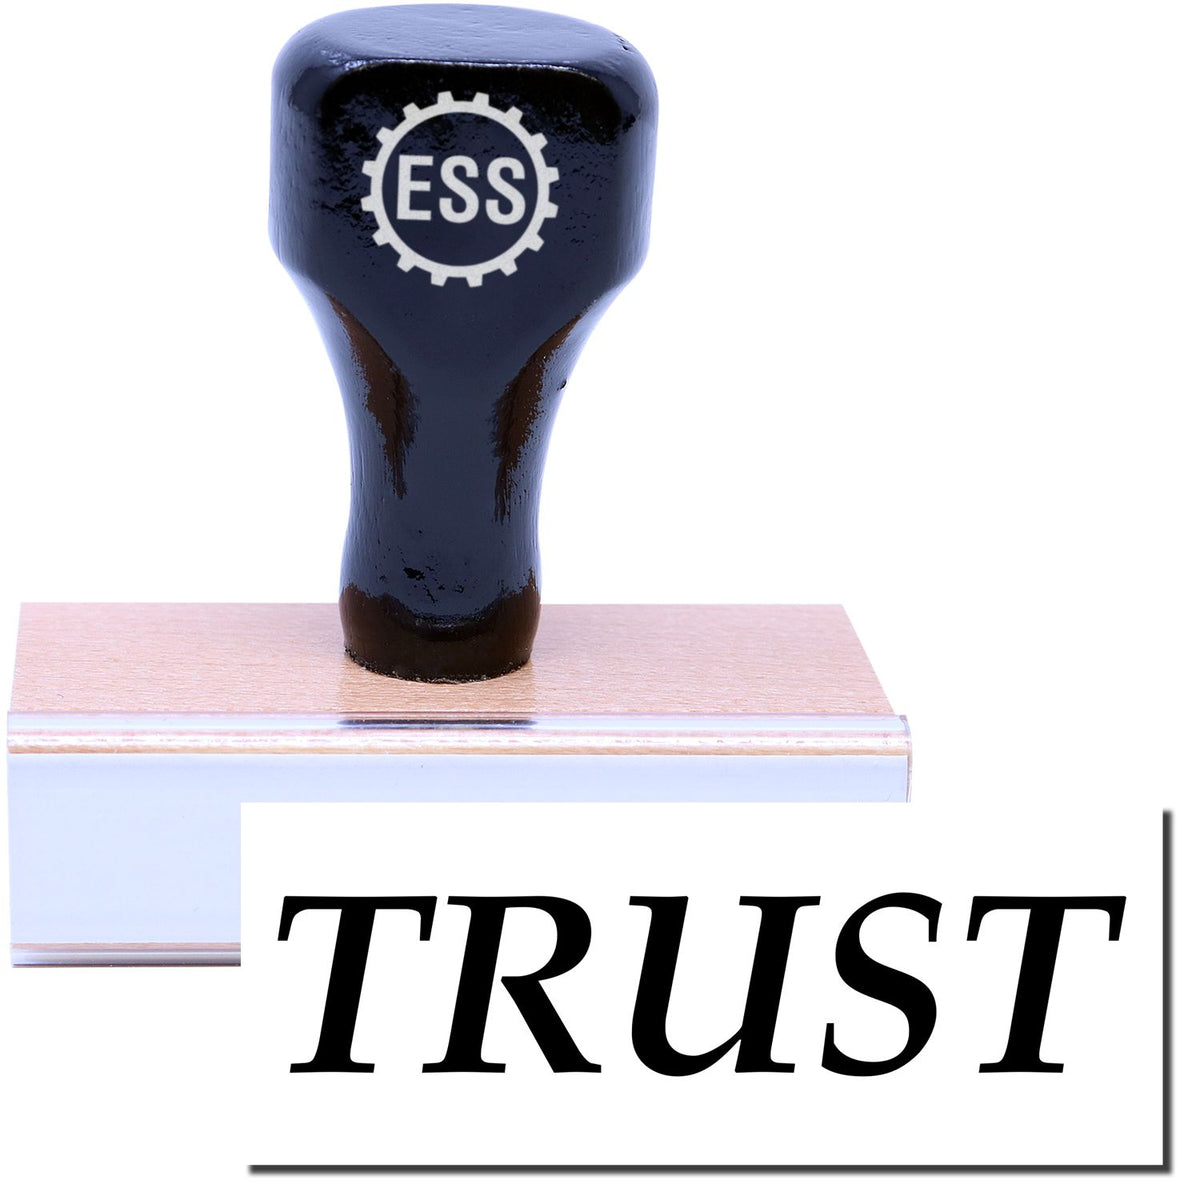 A stock office rubber stamp with a stamped image showing how the text &quot;TRUST&quot; is displayed after stamping.